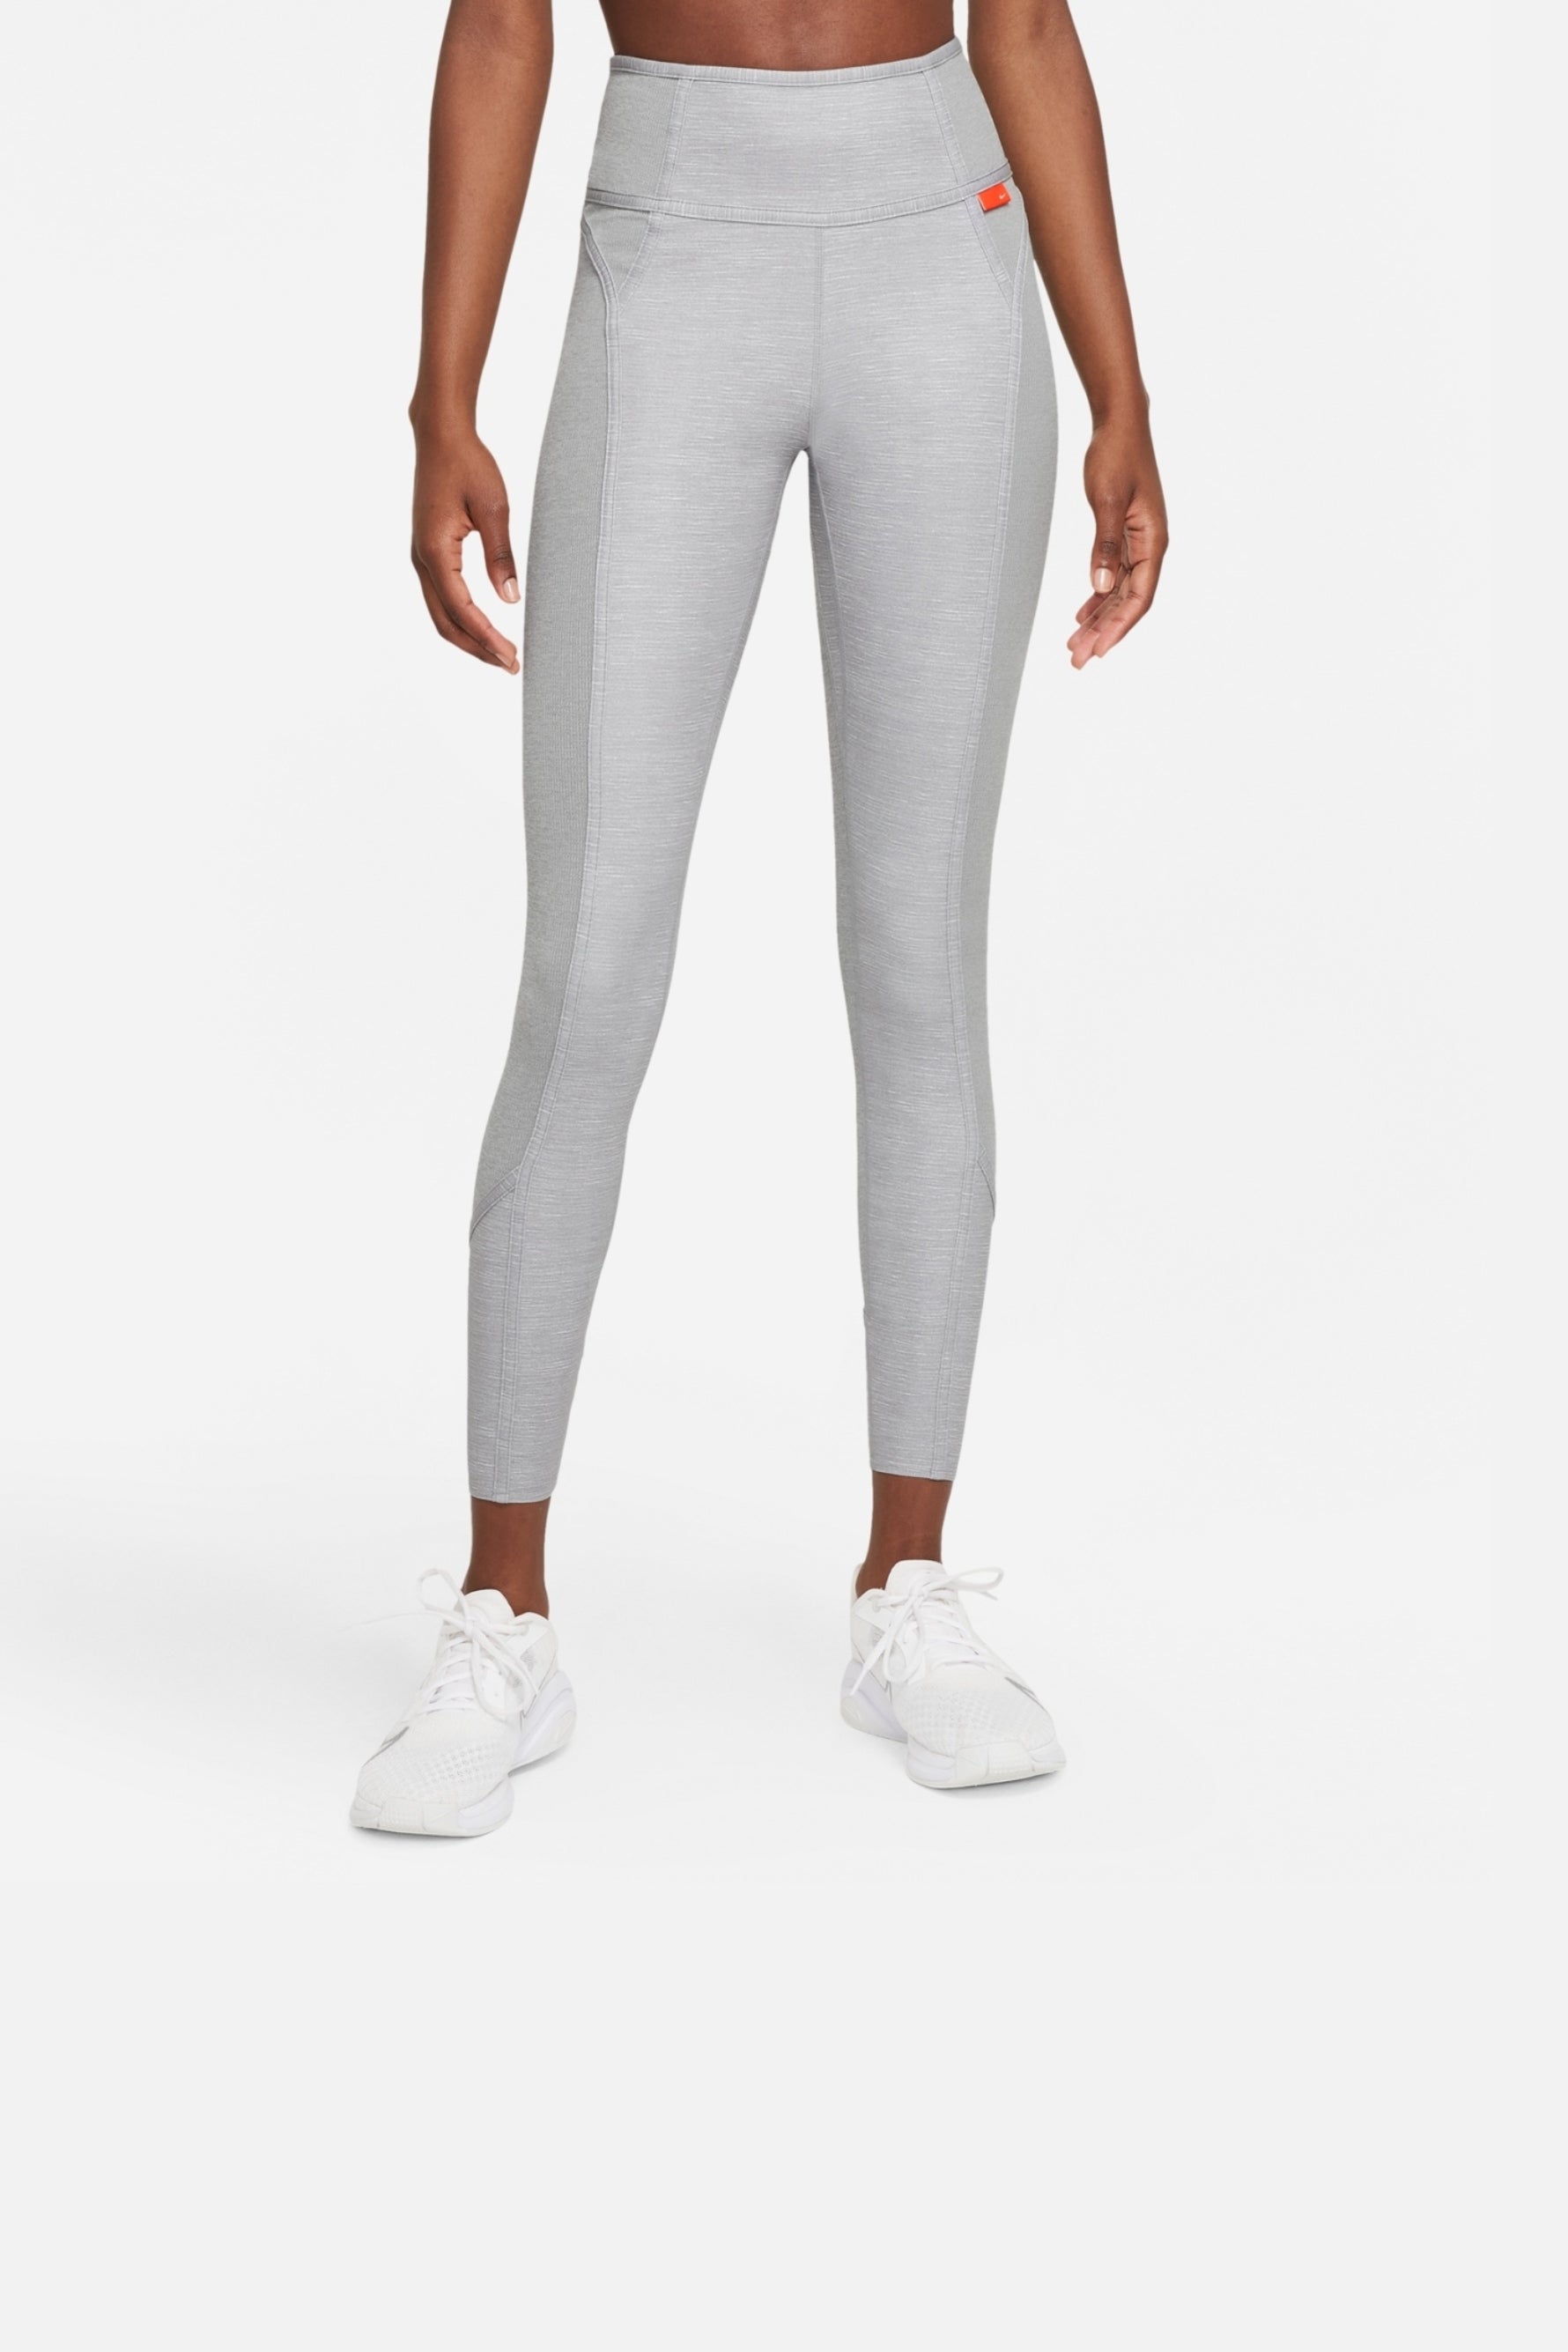 Verzorger bijtend Humanistisch Nike One Luxe Dri-FIT Novelty Mid-Rise Tight - BANDIER